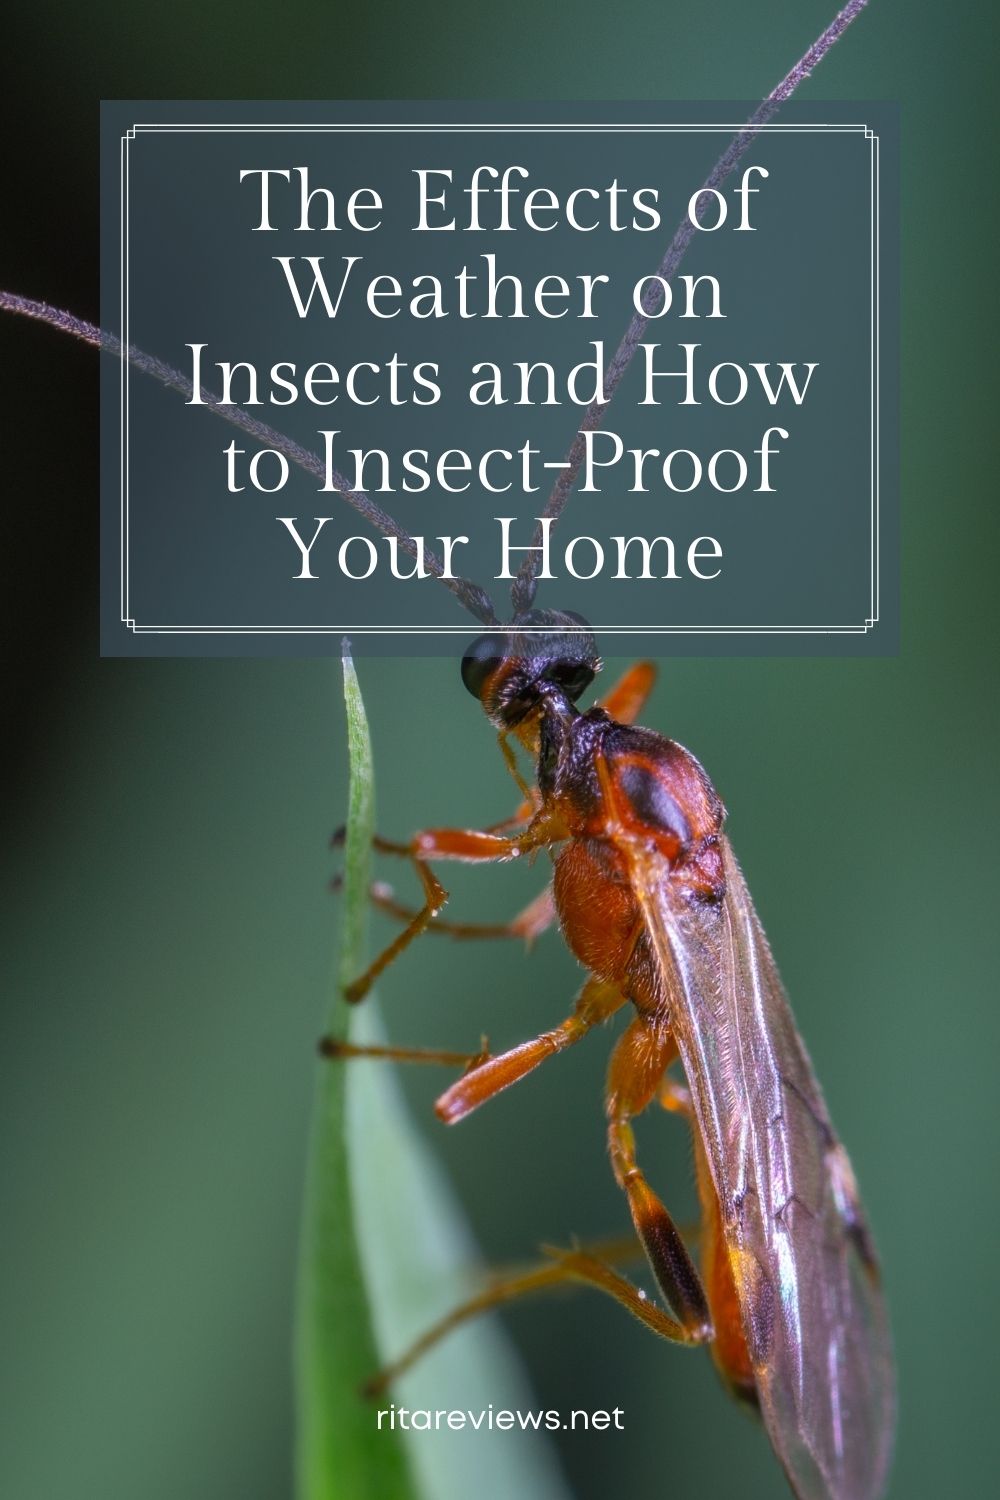 he Effects of Weather on Insects and How to Insect-Proof Your Home